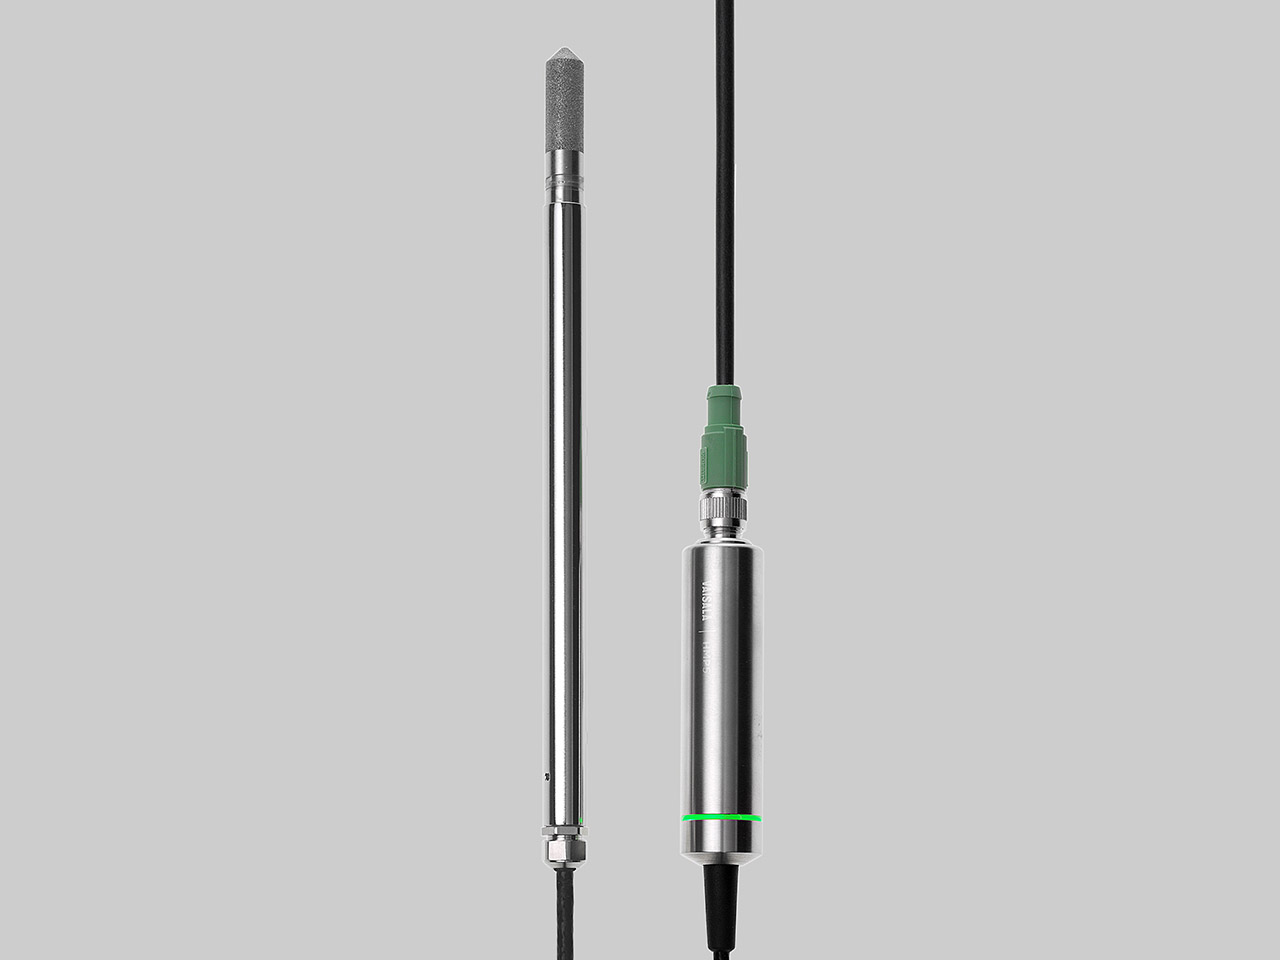 Vaisala HUMICAP ® Humidity and Temperature Probe HMP5 is designed for high Temperature applications